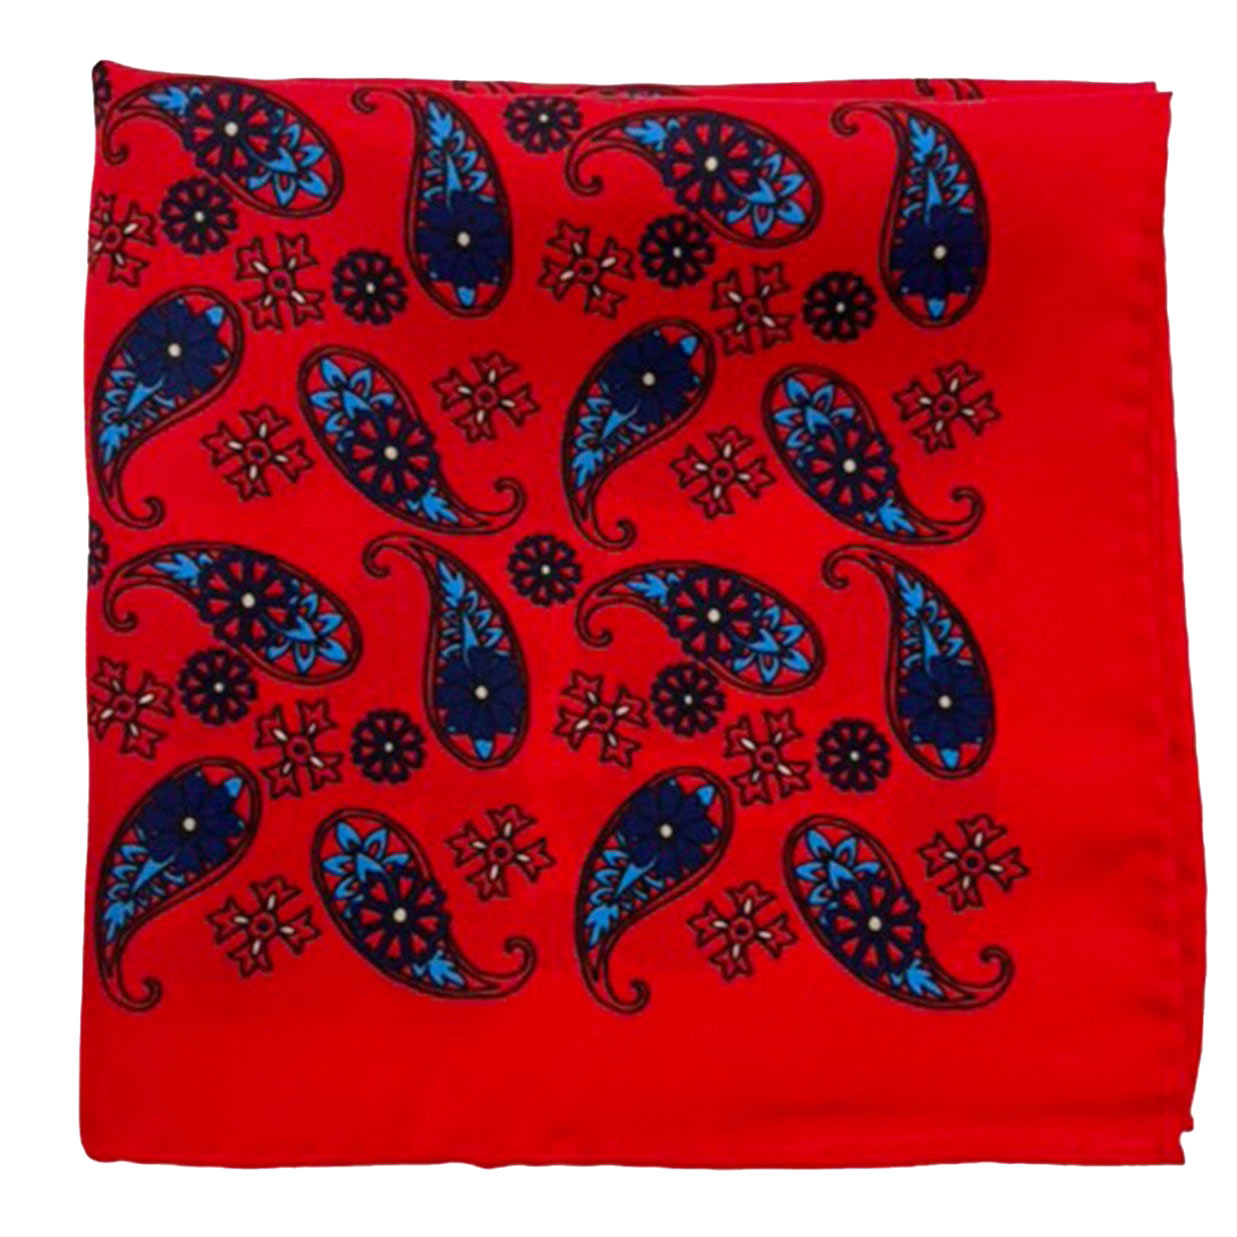 Pure silk 'Casablanca' pocket square folded into a quarter, showing blue paisley 'tears' interdispersed with decorative floral patterns on a vibrant red ground.